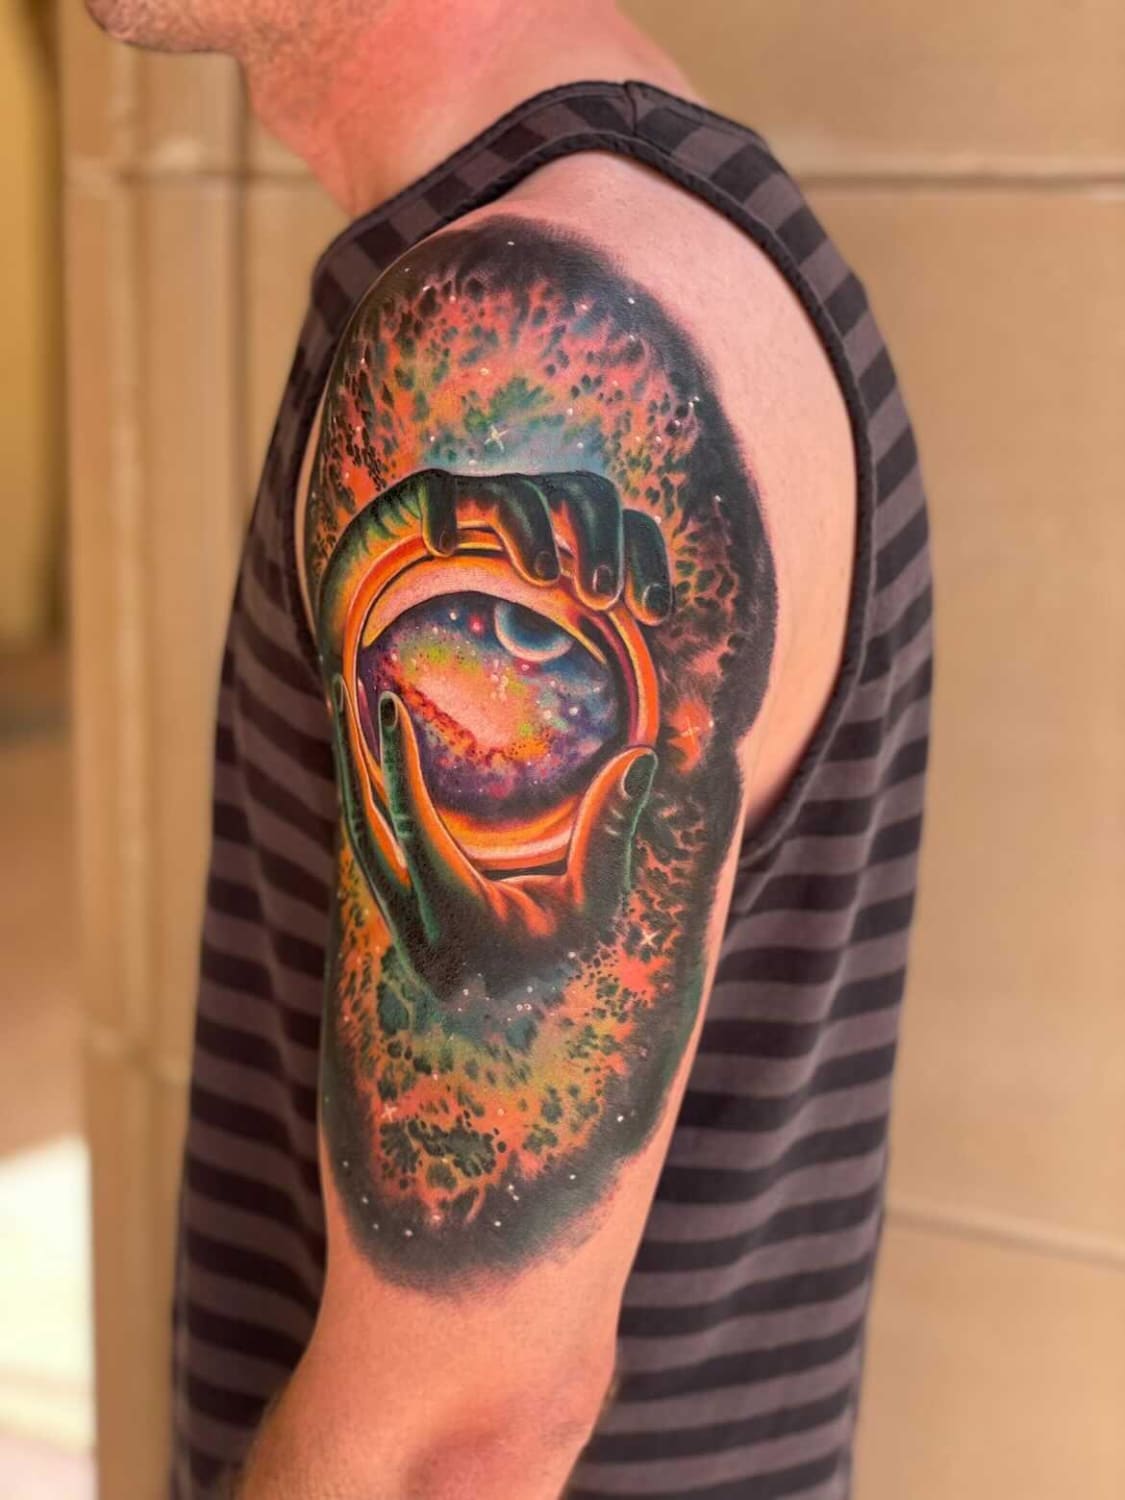 The start of a space sleeve by Stephanie Heffron at 2512 from Tucson,Az